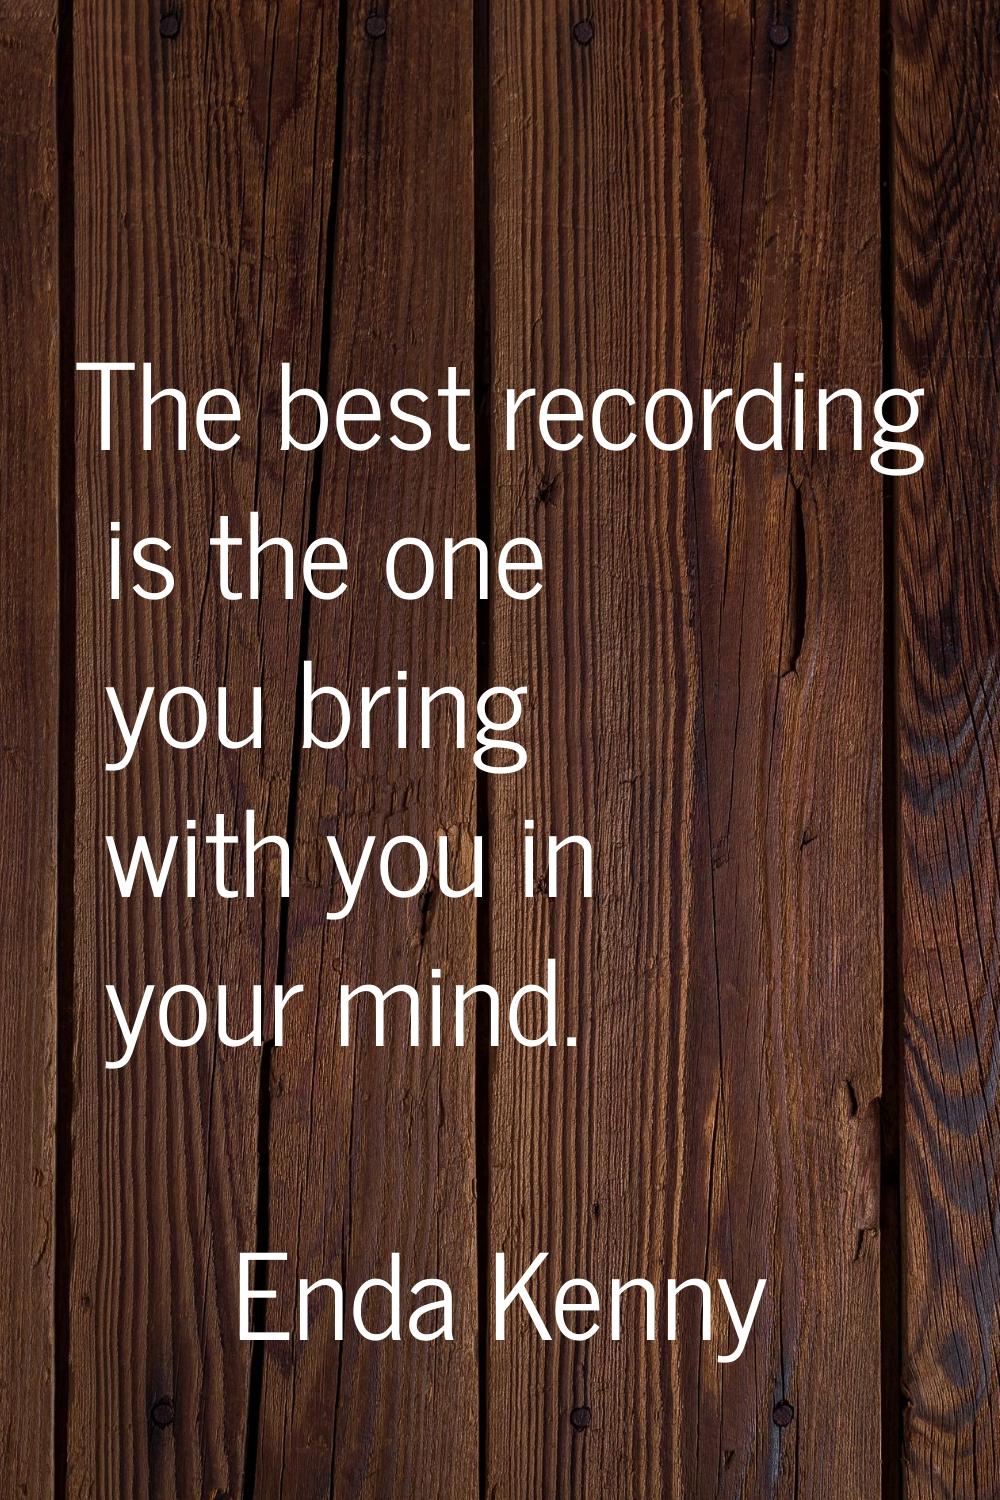 The best recording is the one you bring with you in your mind.